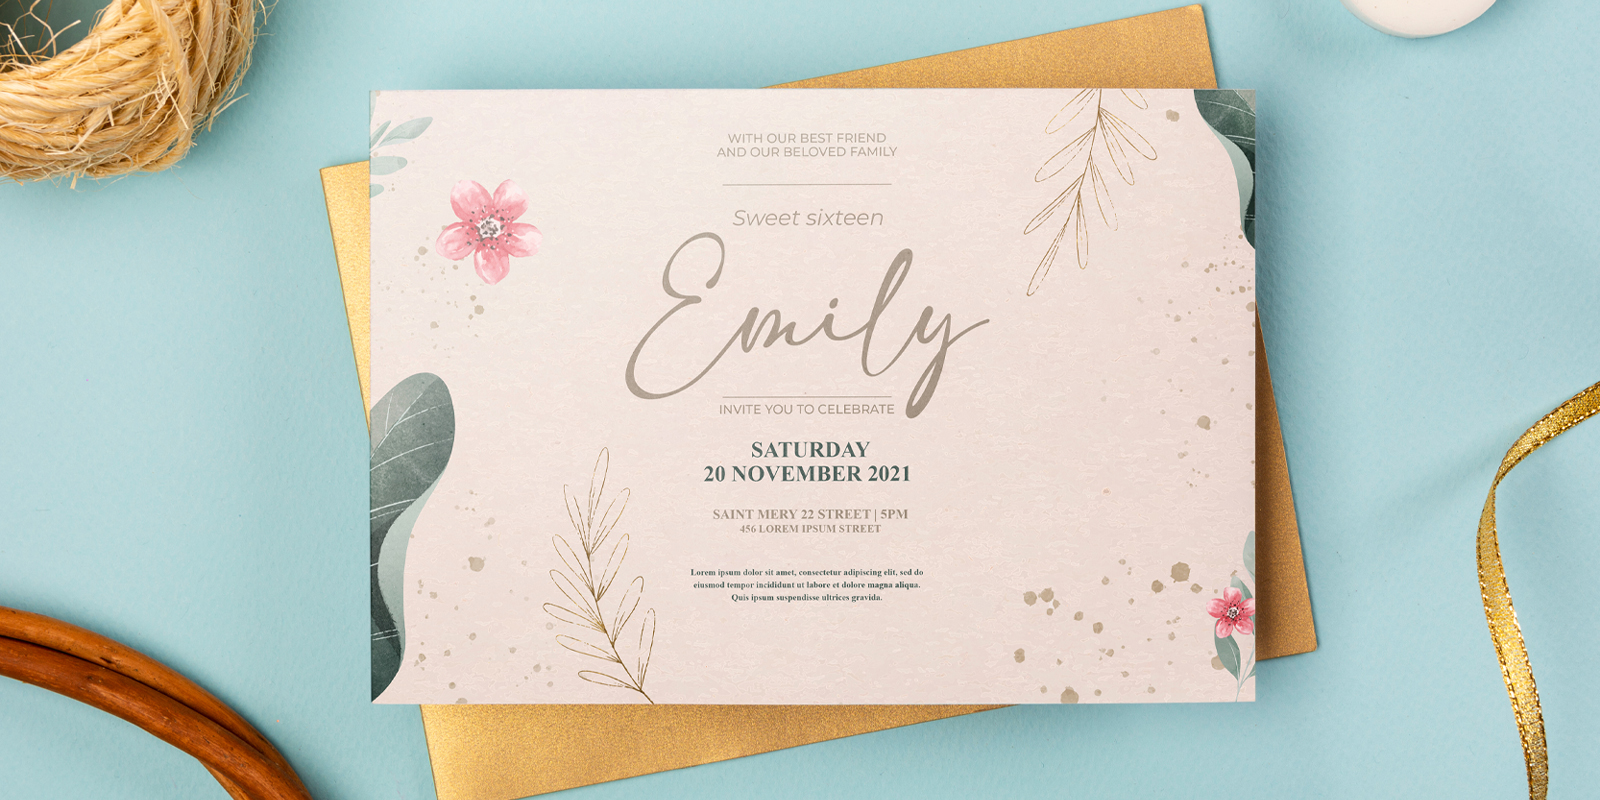 Invitations in Hamburg - Print with Pagerr